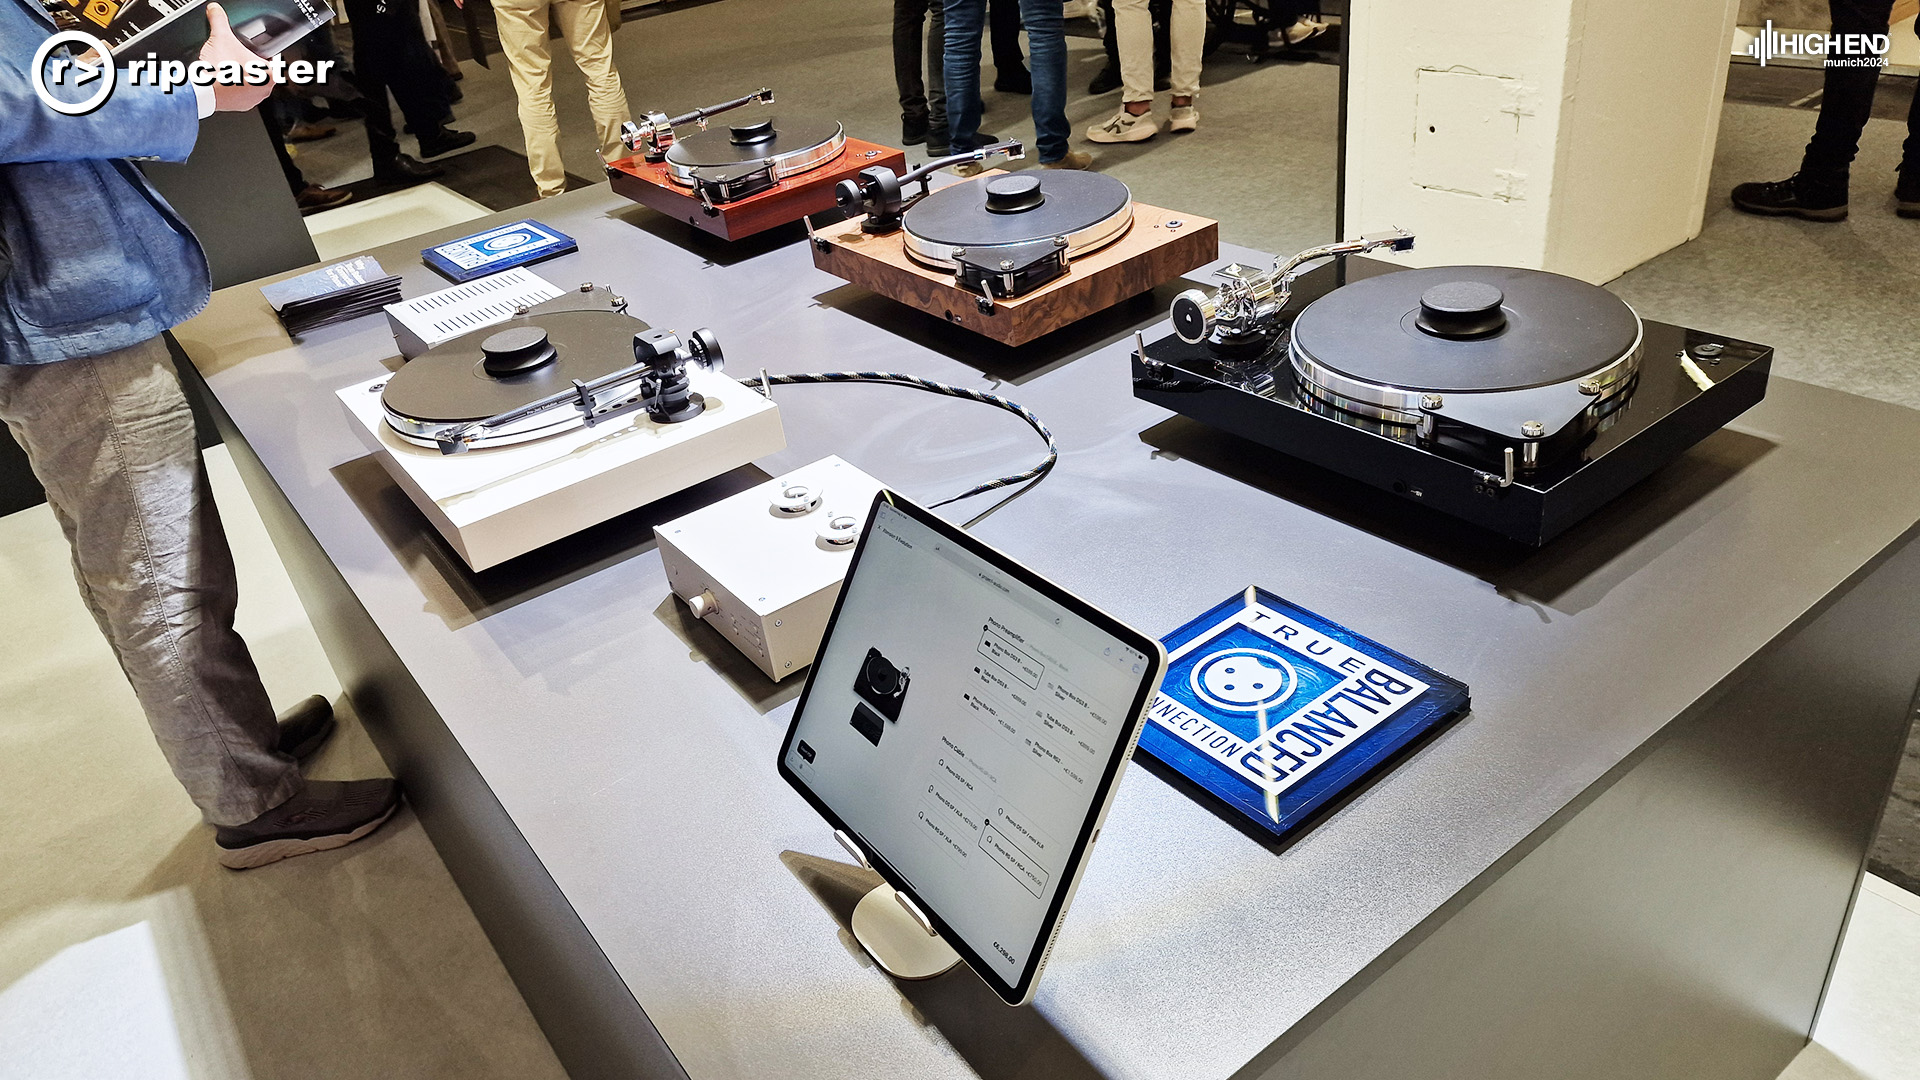 Project turntables on a black unit with an iPad in the foreground.